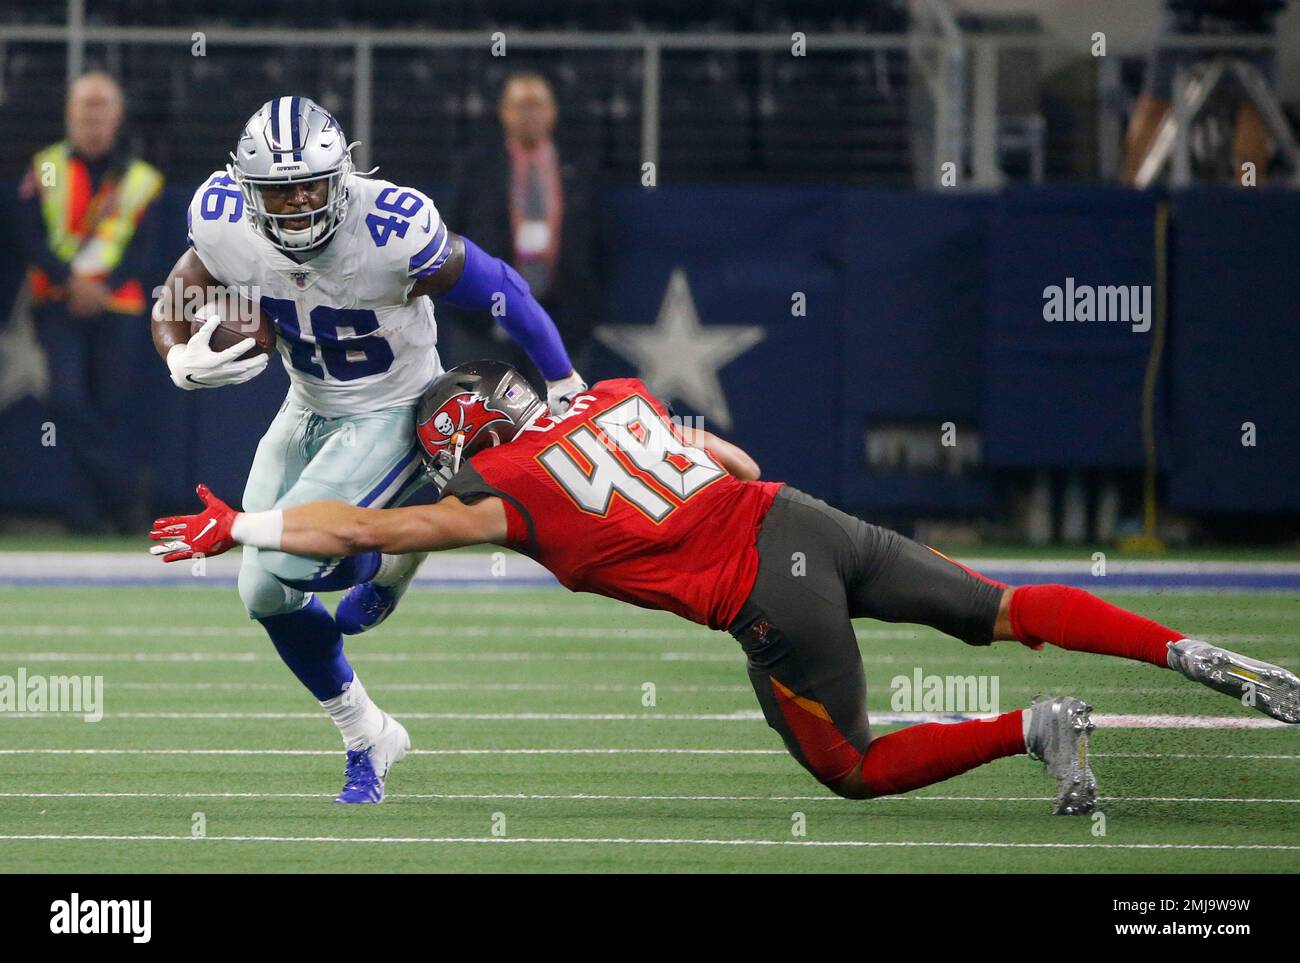 Dallas Cowboys running back Jordan Chunn (46) runs for extra yardage after  catching a pass as Tampa Bay Buccaneers linebacker Jack Cichy (48) makes  the stop in the first half of a